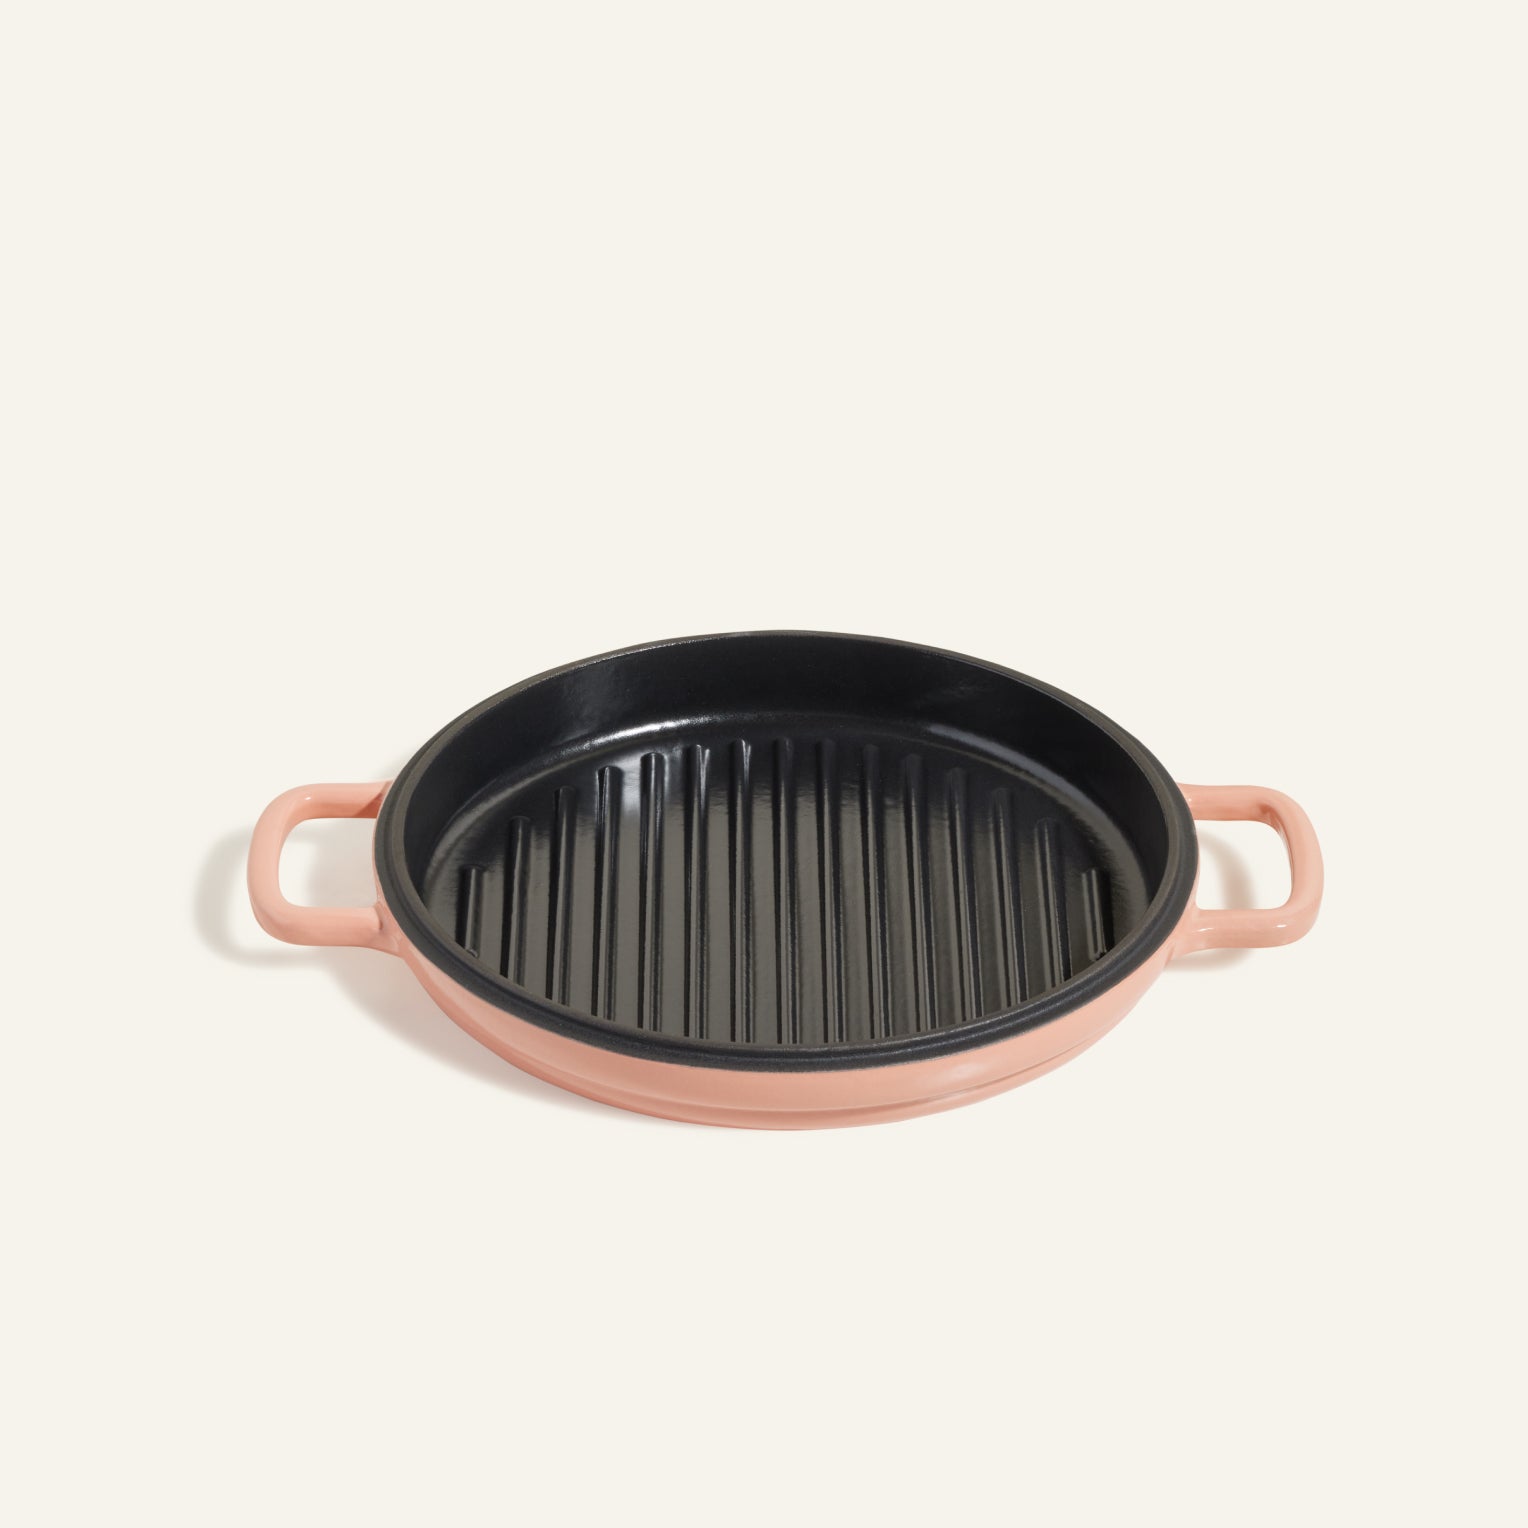 When Grilling Inside, Cast-Iron Cookware Is Your Best Friend